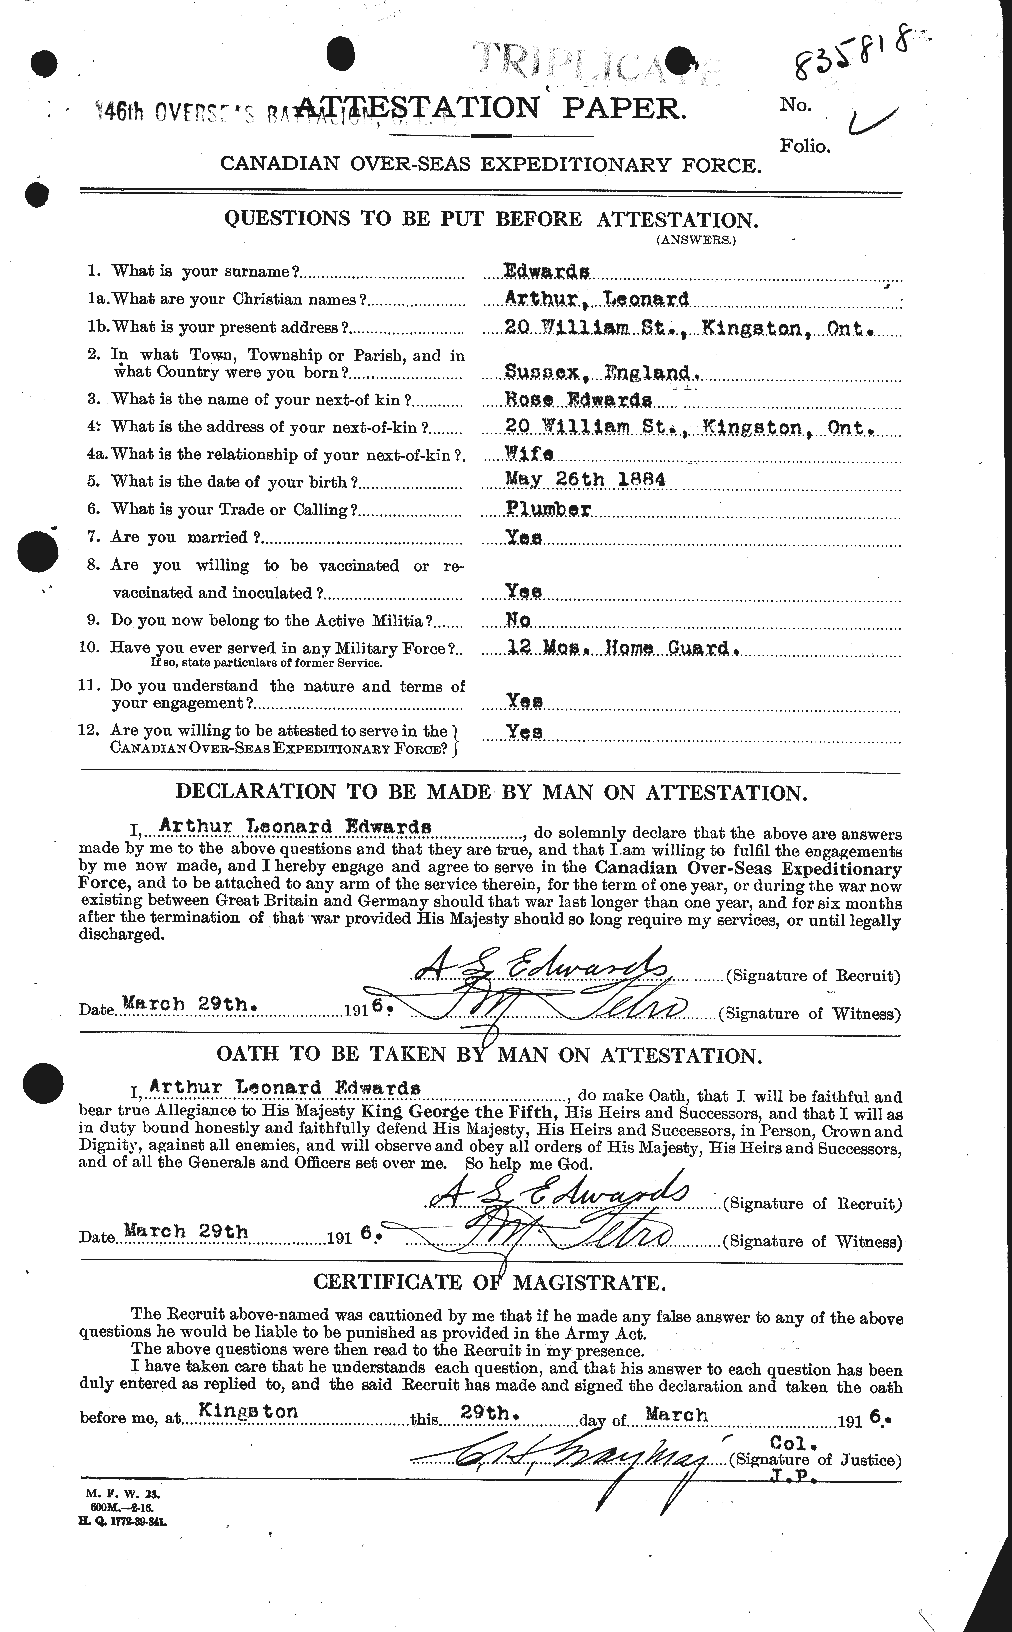 Personnel Records of the First World War - CEF 313143a